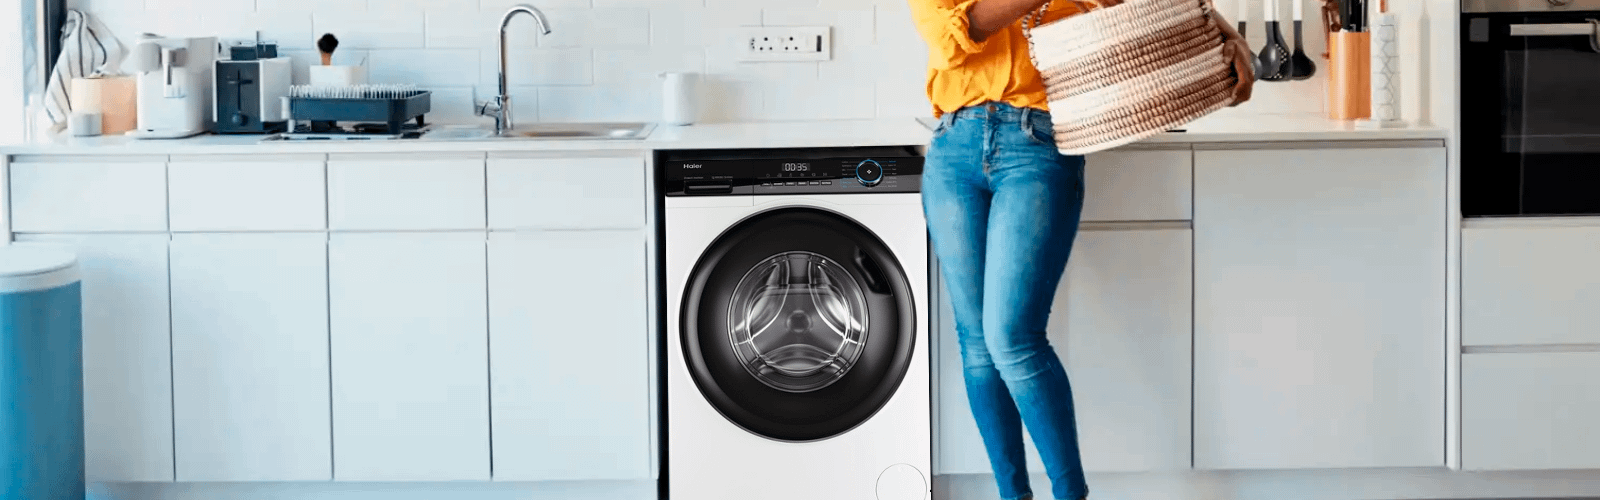 Haier washing machine in a white kitchen. Woman in jean and yellow top is holding a basket in front.